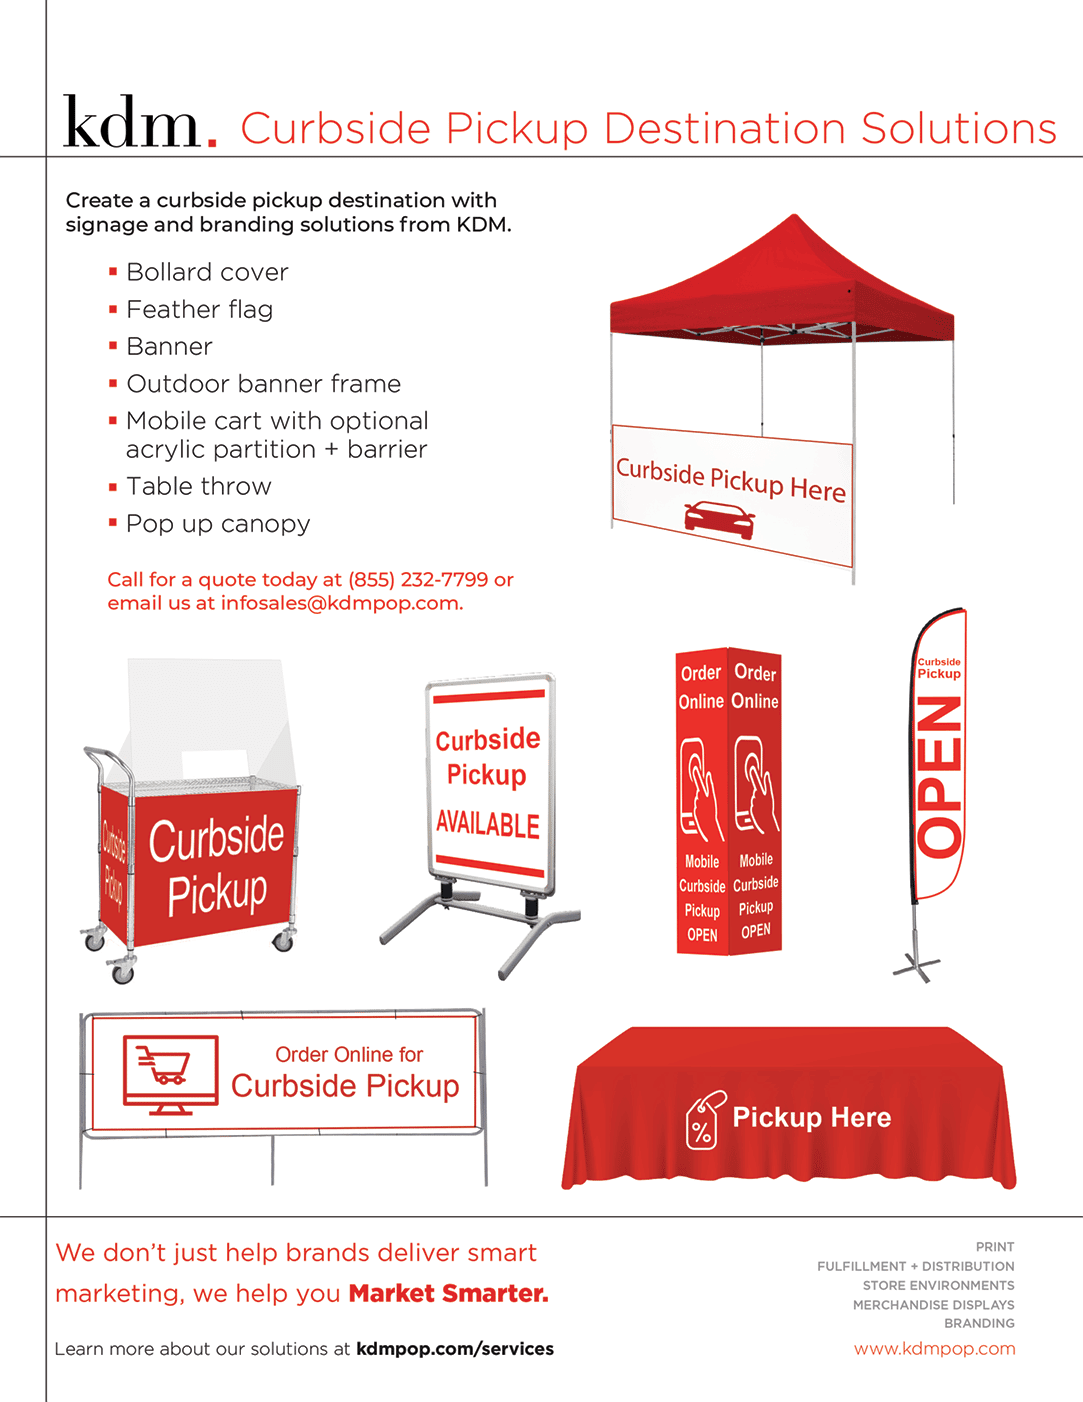 Curbside Pickup Destination Solutions Banner Father Flag POP UP Canopy Bollard Covers